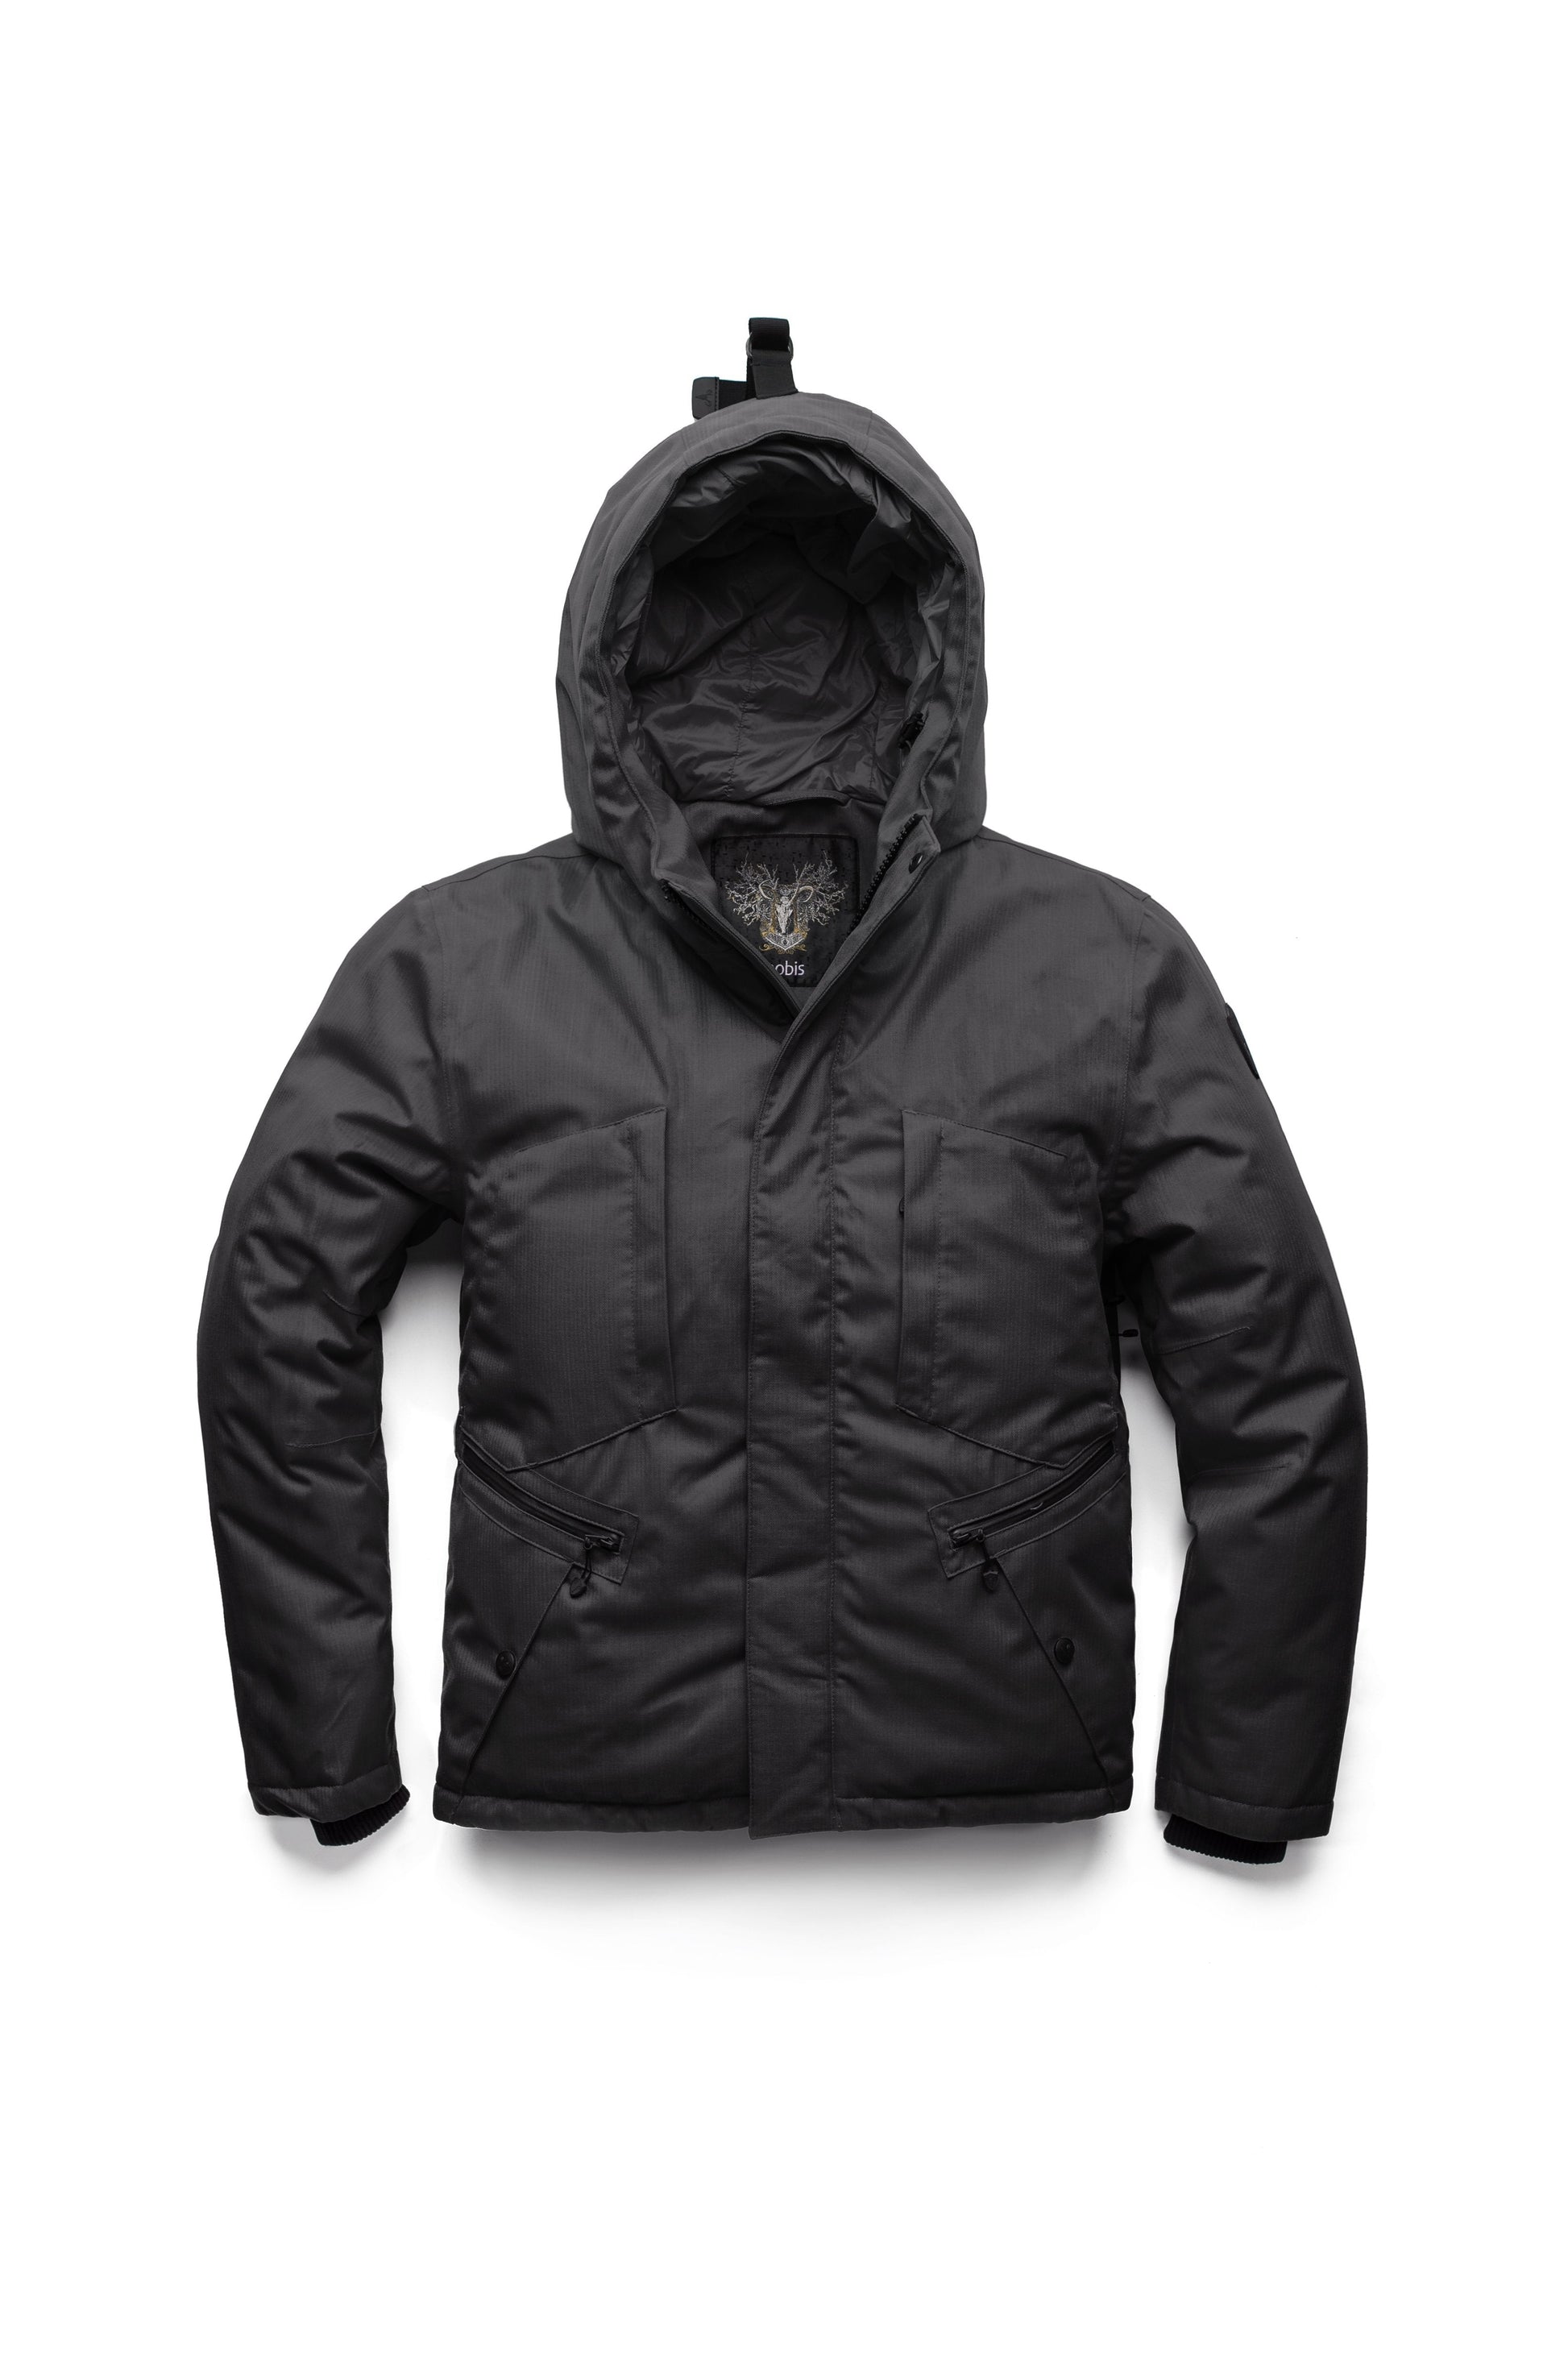 Men's waist length light down coat equipped with six exterior pockets and a hood in Black